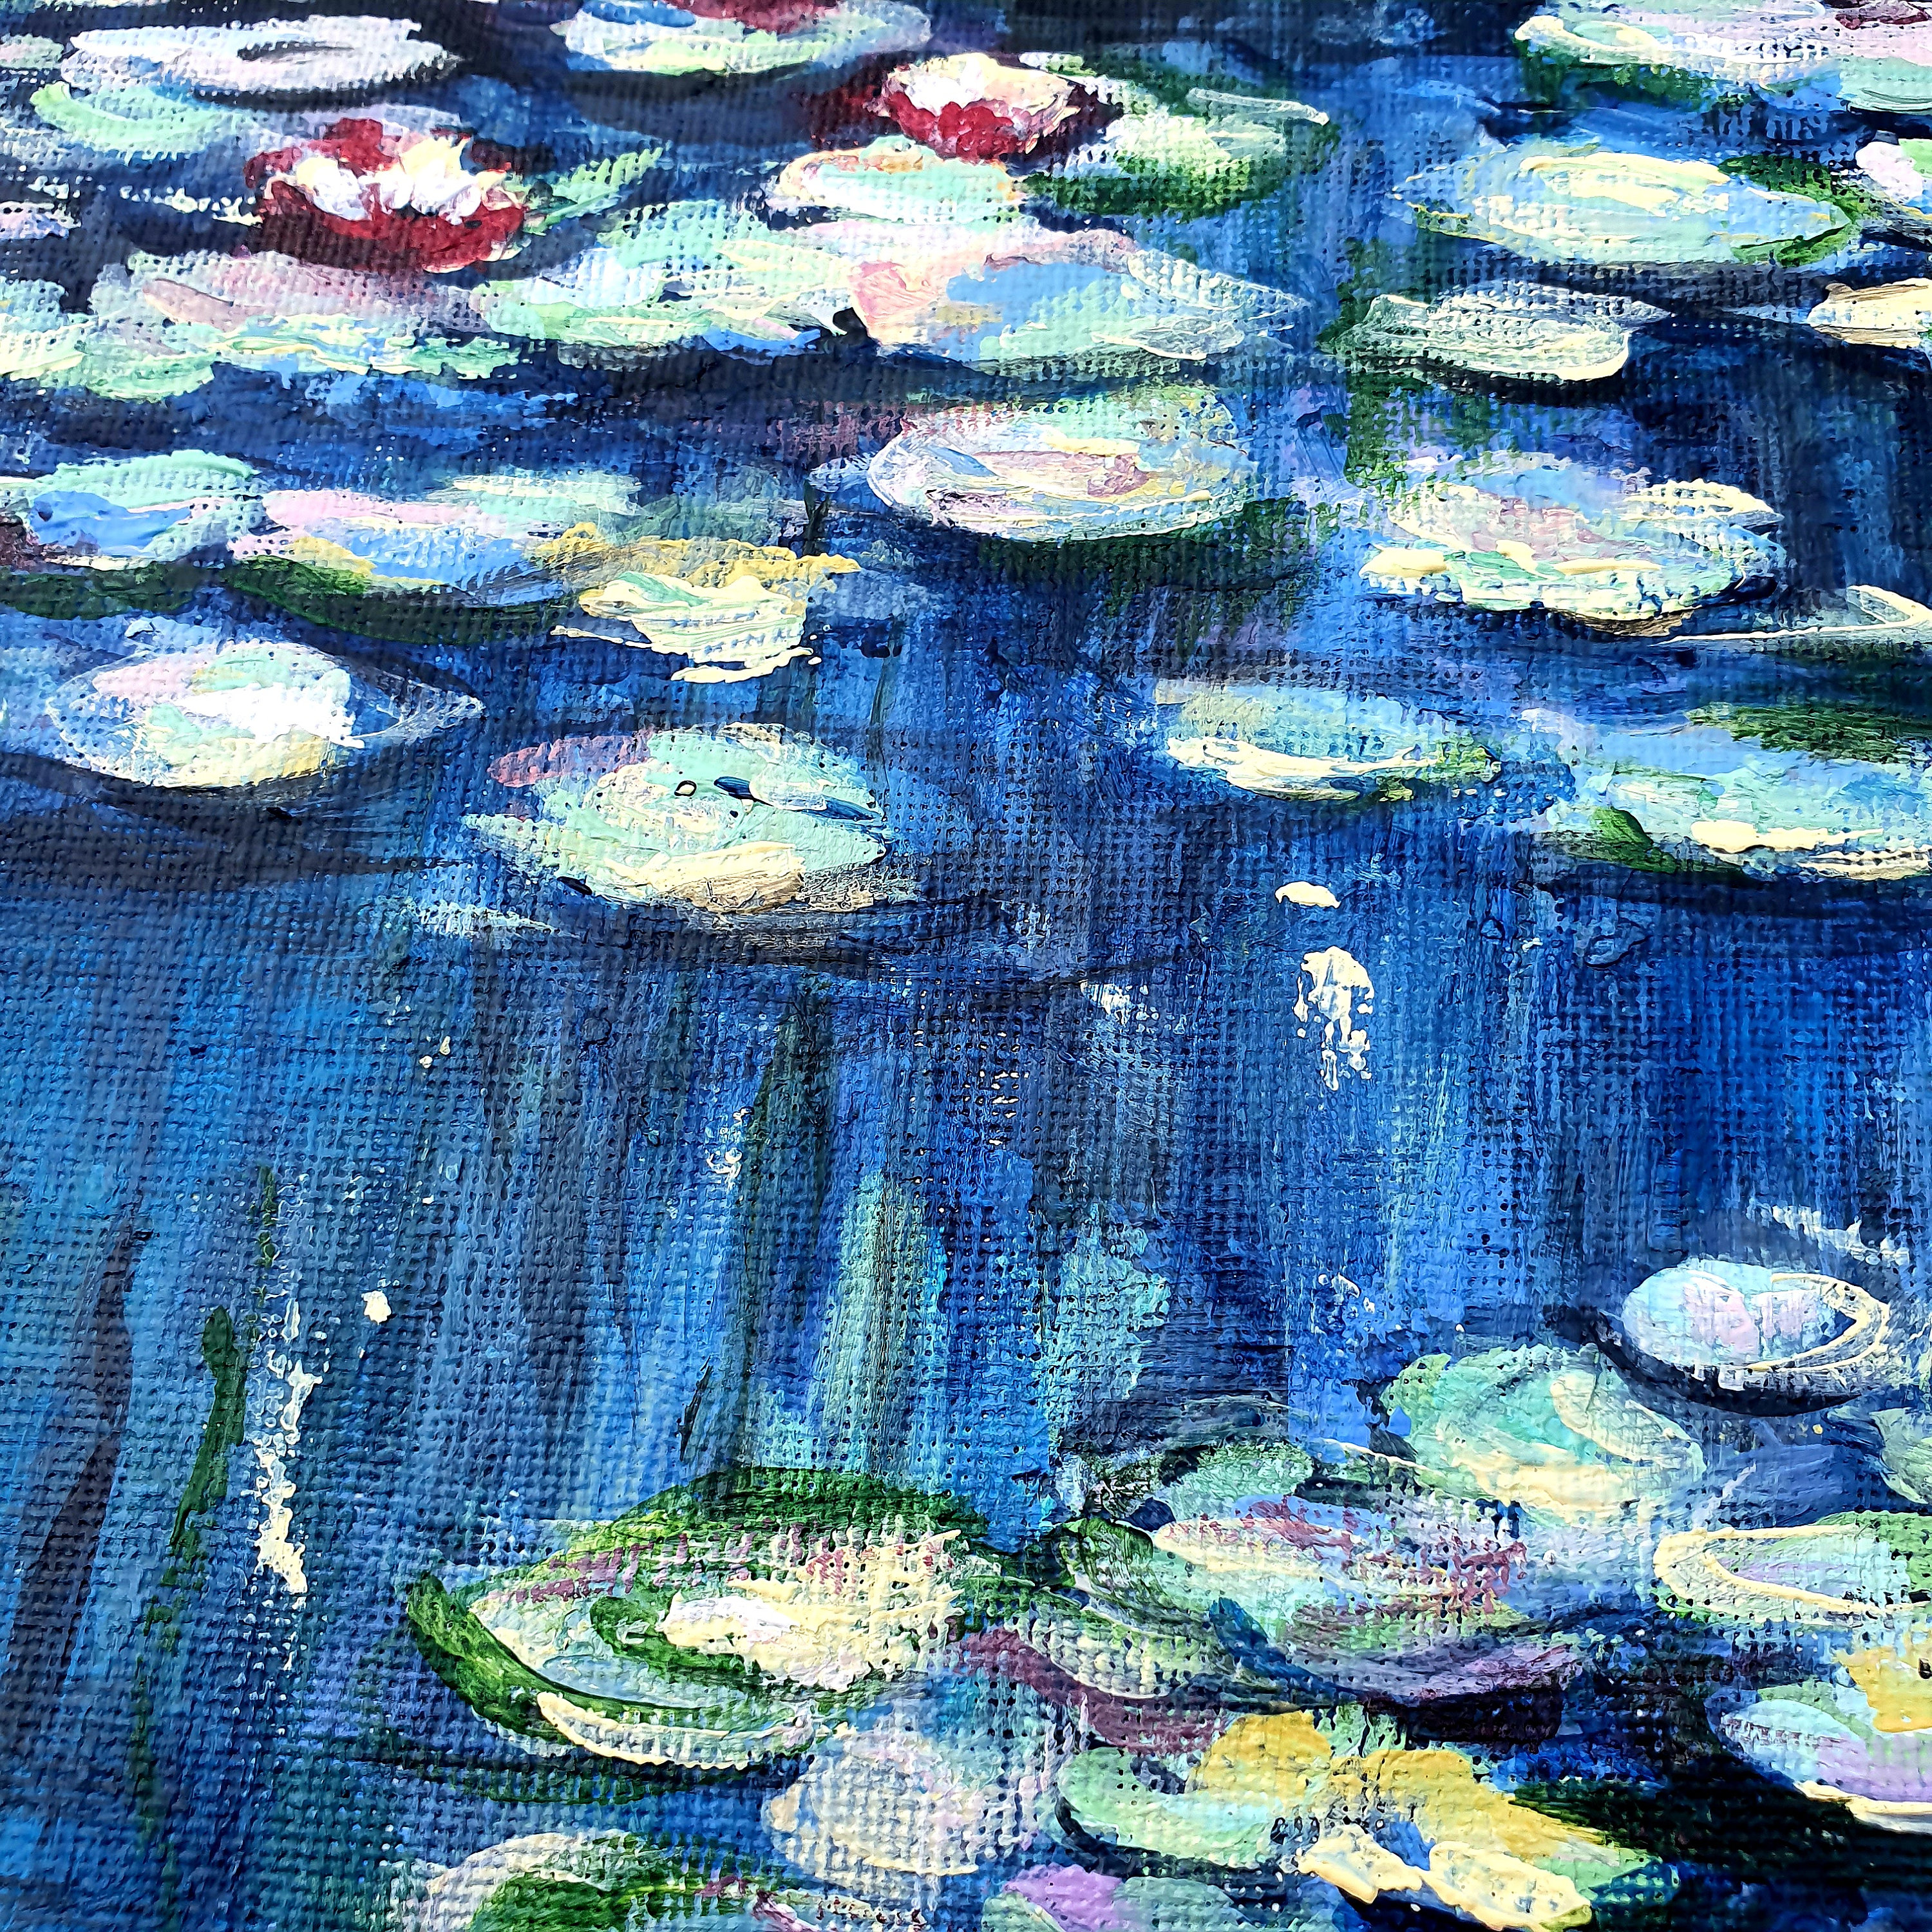 Original Canvas Painting, Large Wall Art 40x40cms, Vibrant Water Lilies,  Acrylic Textured With Palette Knife on Canvas Board, Unframed, 